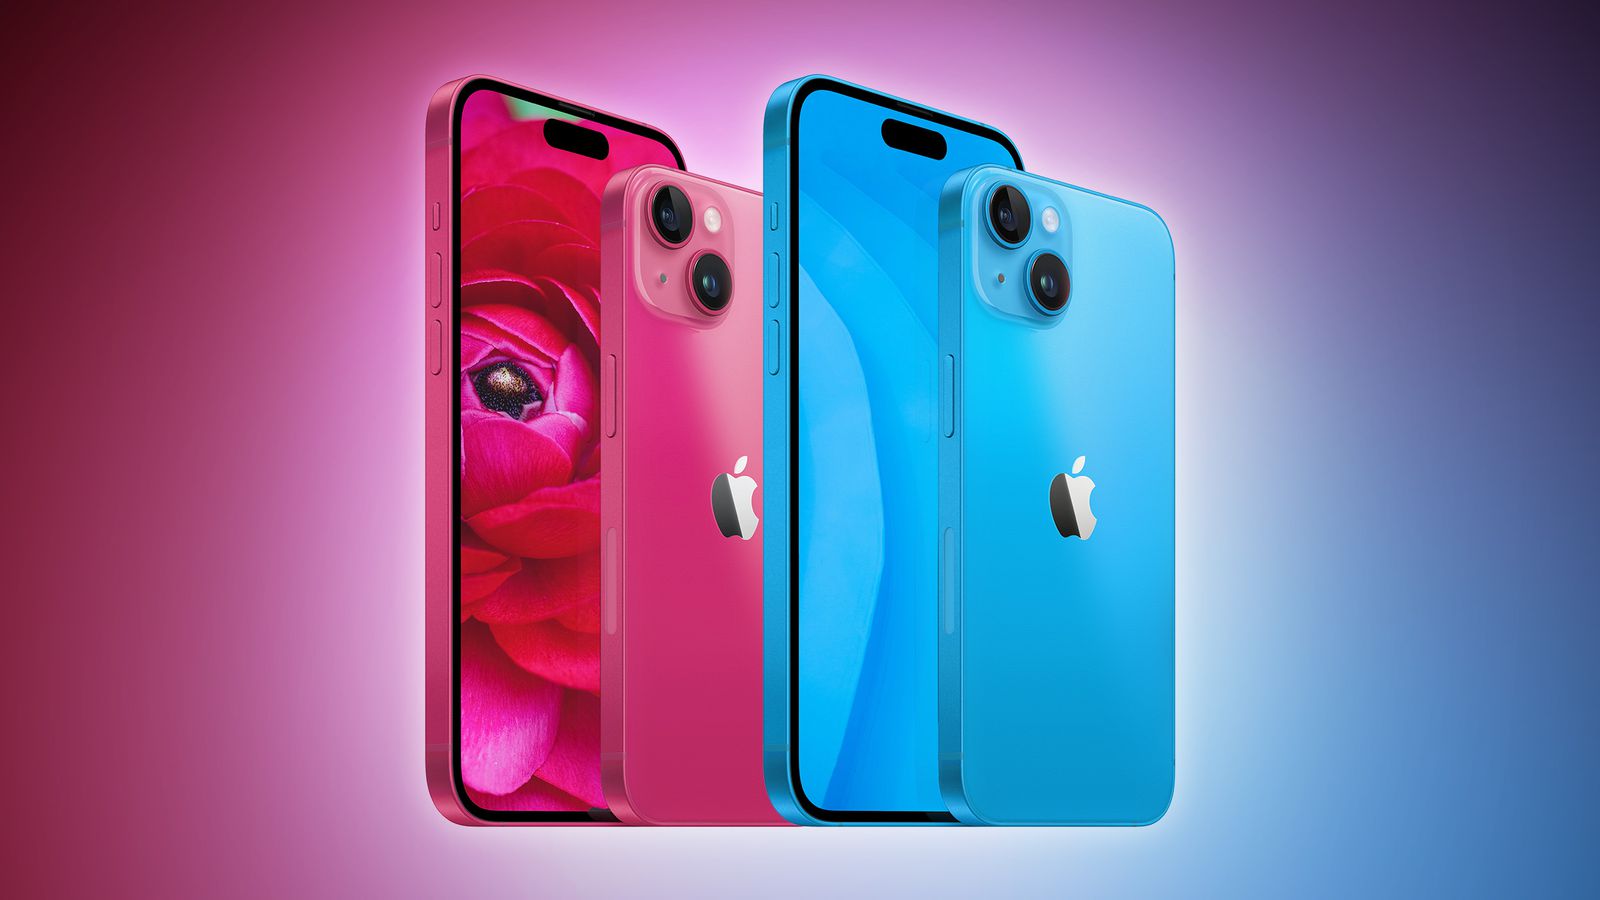 https://images.macrumors.com/t/ut965WVHwS-e-kZX3NJKBT6LC-M=/1600x0/article-new/2023/04/iPhone-15-Cyan-and-Magenta-Frosted-Back-Feature.jpg